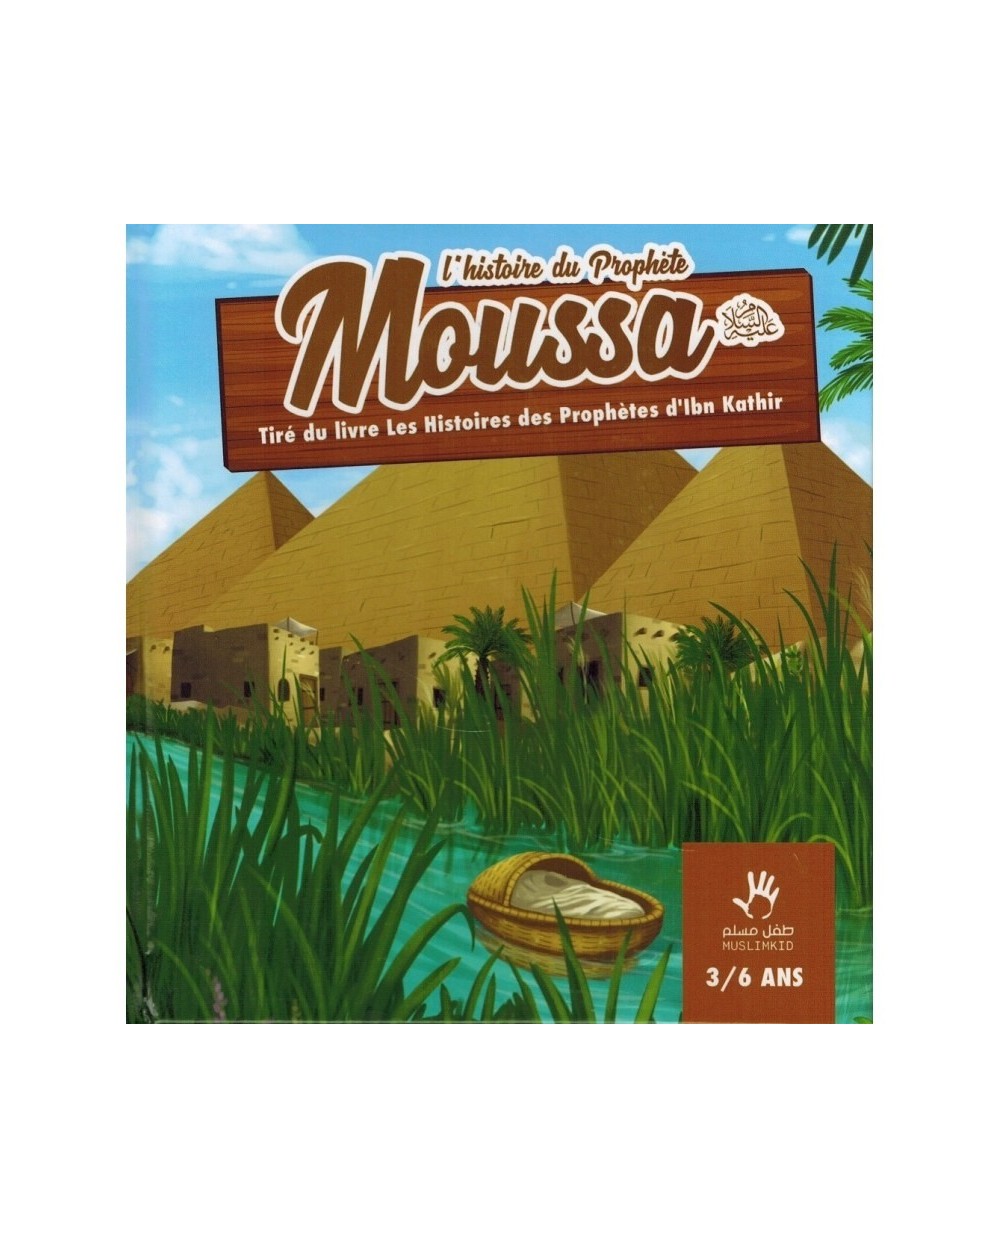 THE HISTORY OF THE PROPHET MOUSSA (3/6 YEARS) - MUSLIMKID